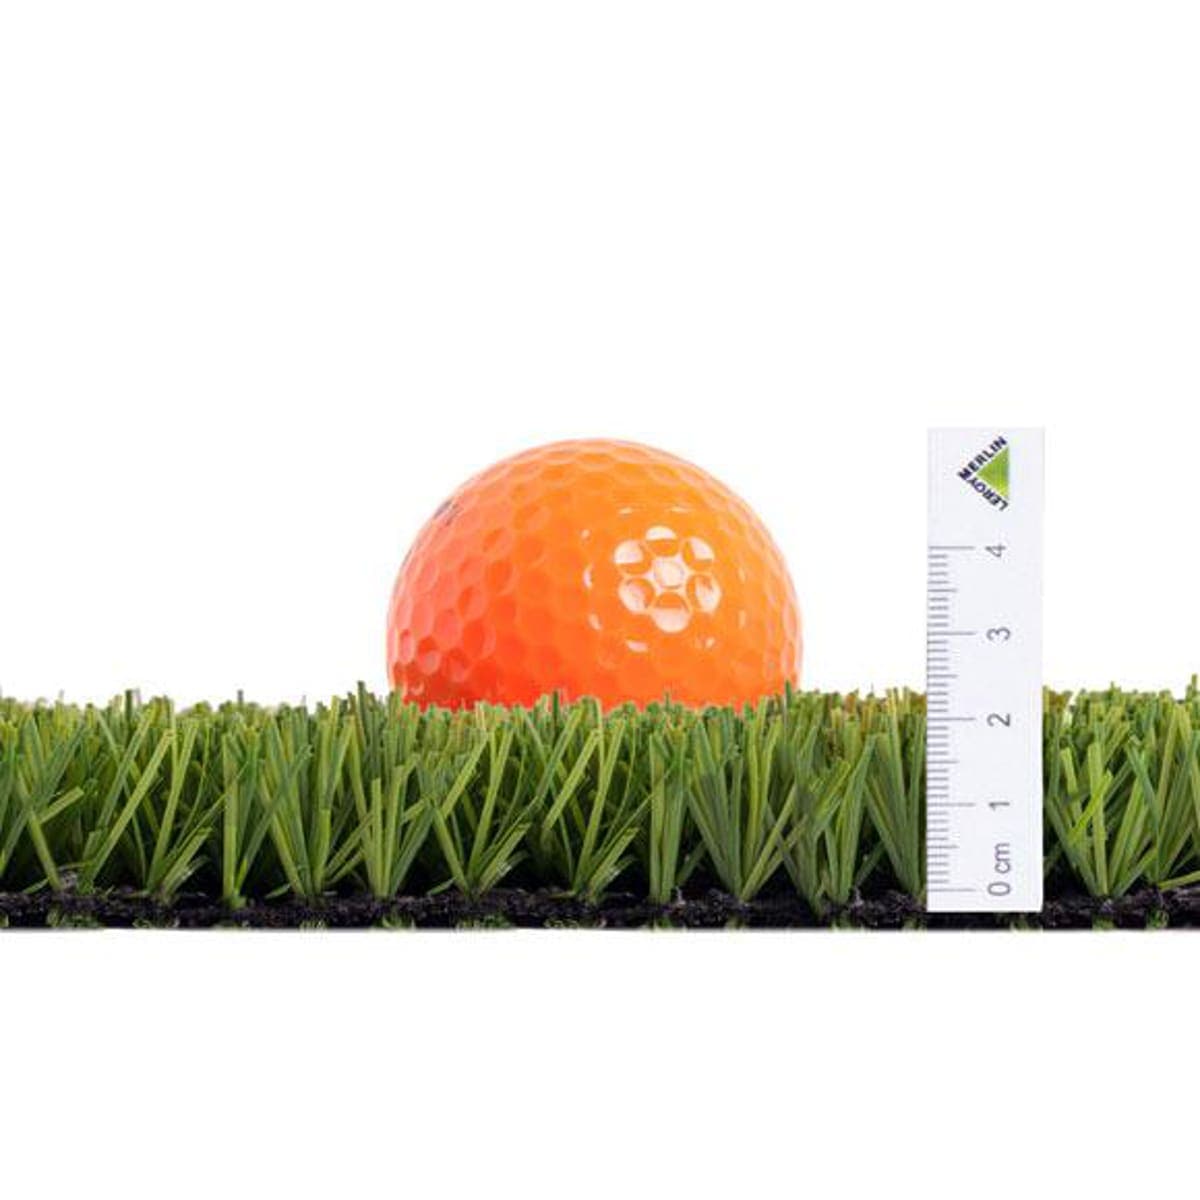 *SYNTHETIC GRASS -20 MM- H 2 M - best price from Maltashopper.com BR500008789